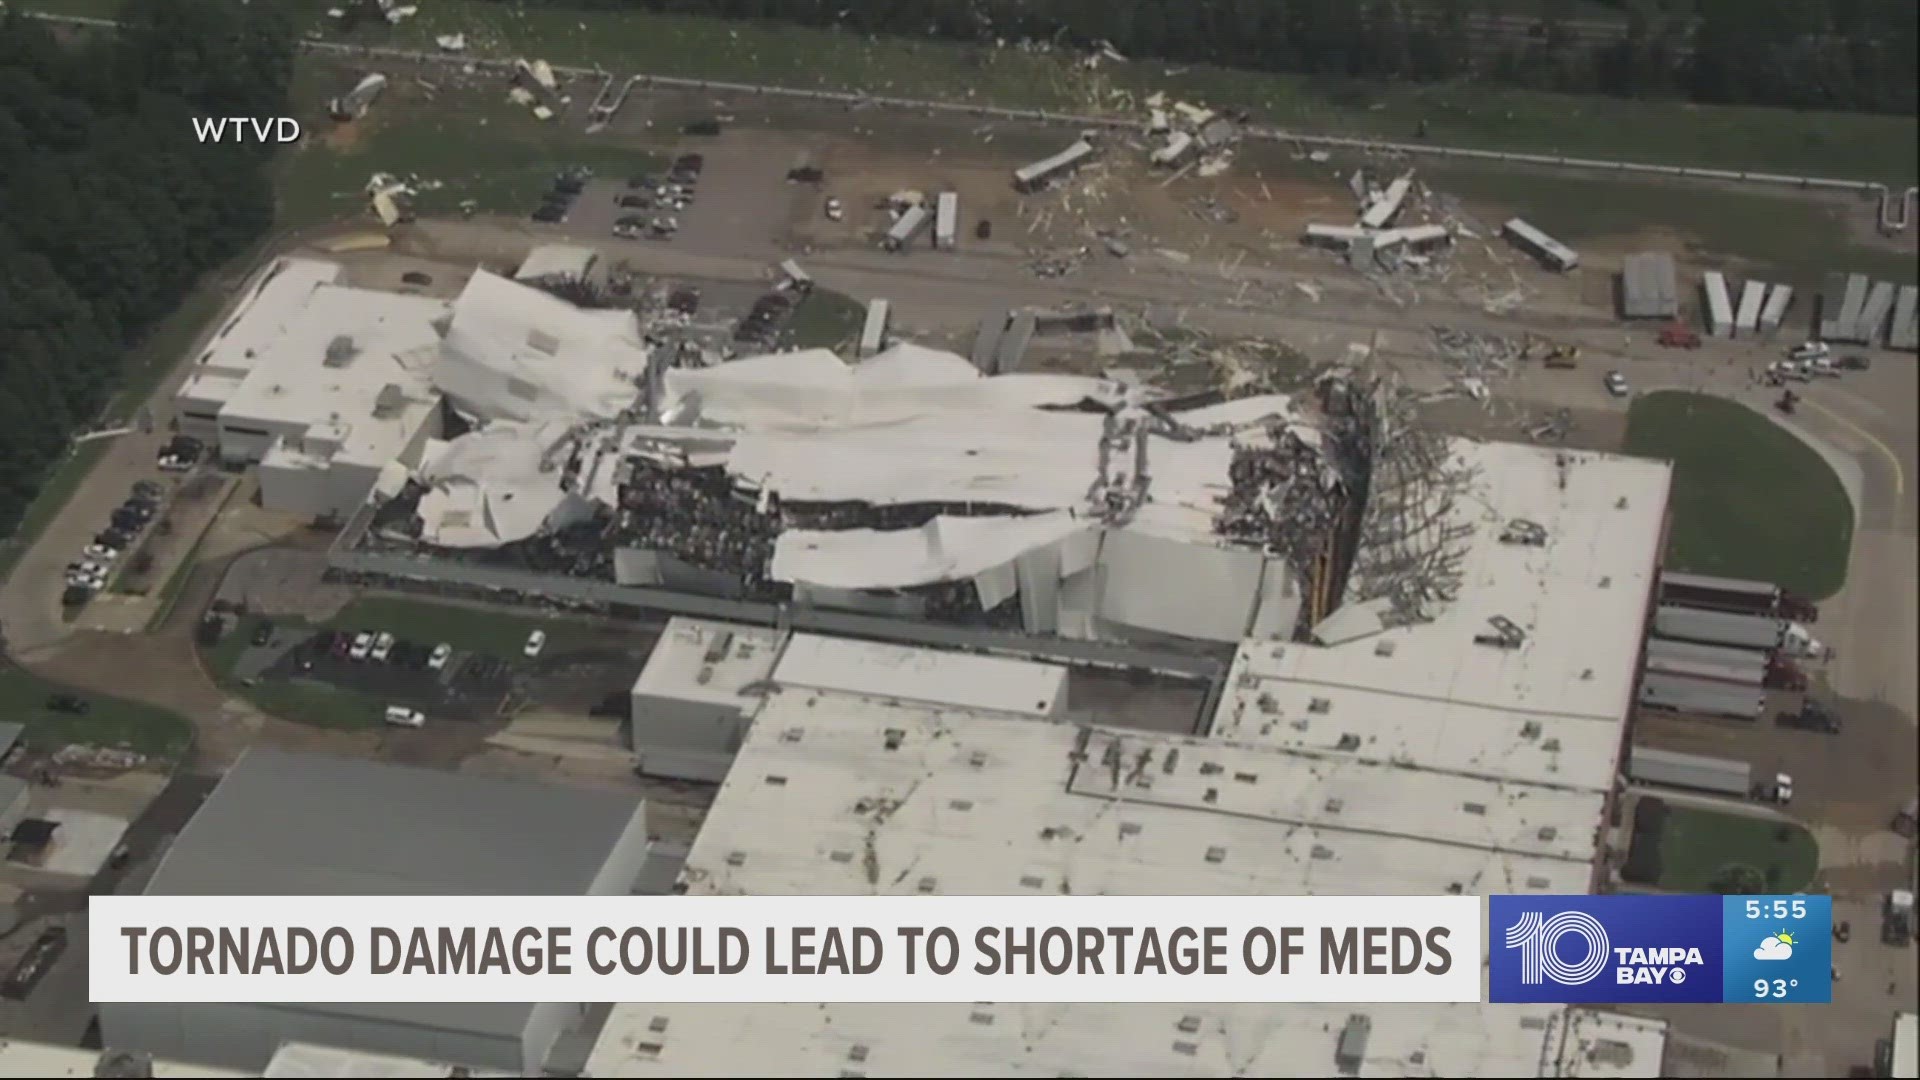 Parts of roofs were ripped open atop its massive buildings and large quantities of medicine that were stored inside were tossed about.